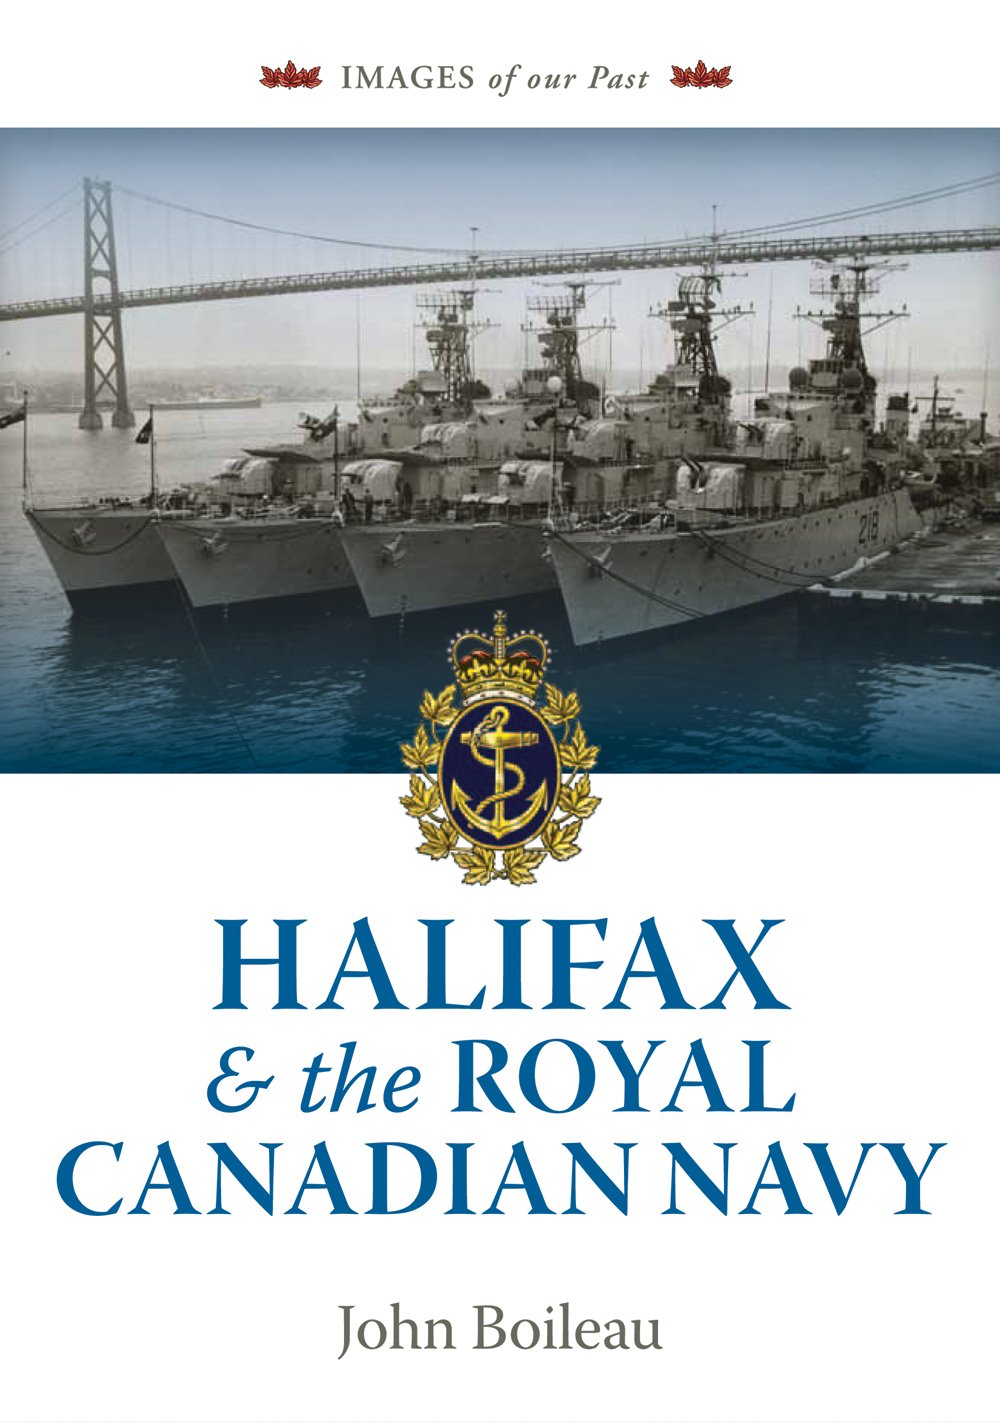 Halifax & the Royal Canadian Navy by John Boileau